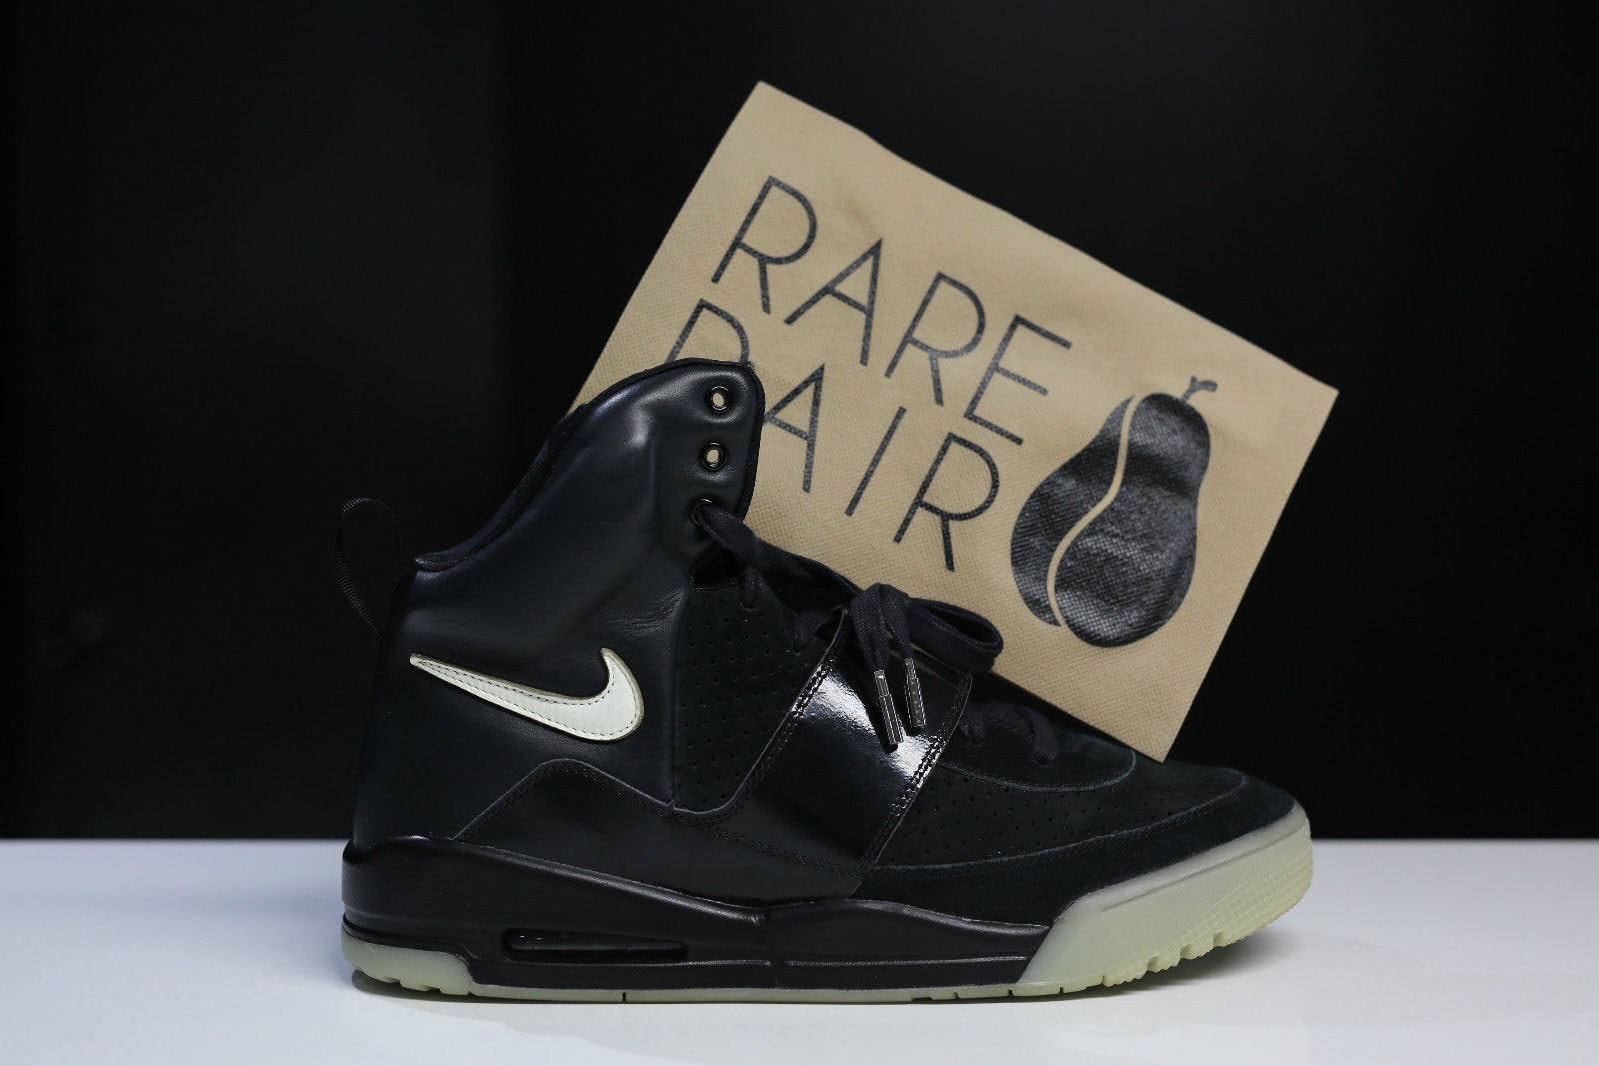 Nike Air Yeezy 1 Promo Sample For Auction